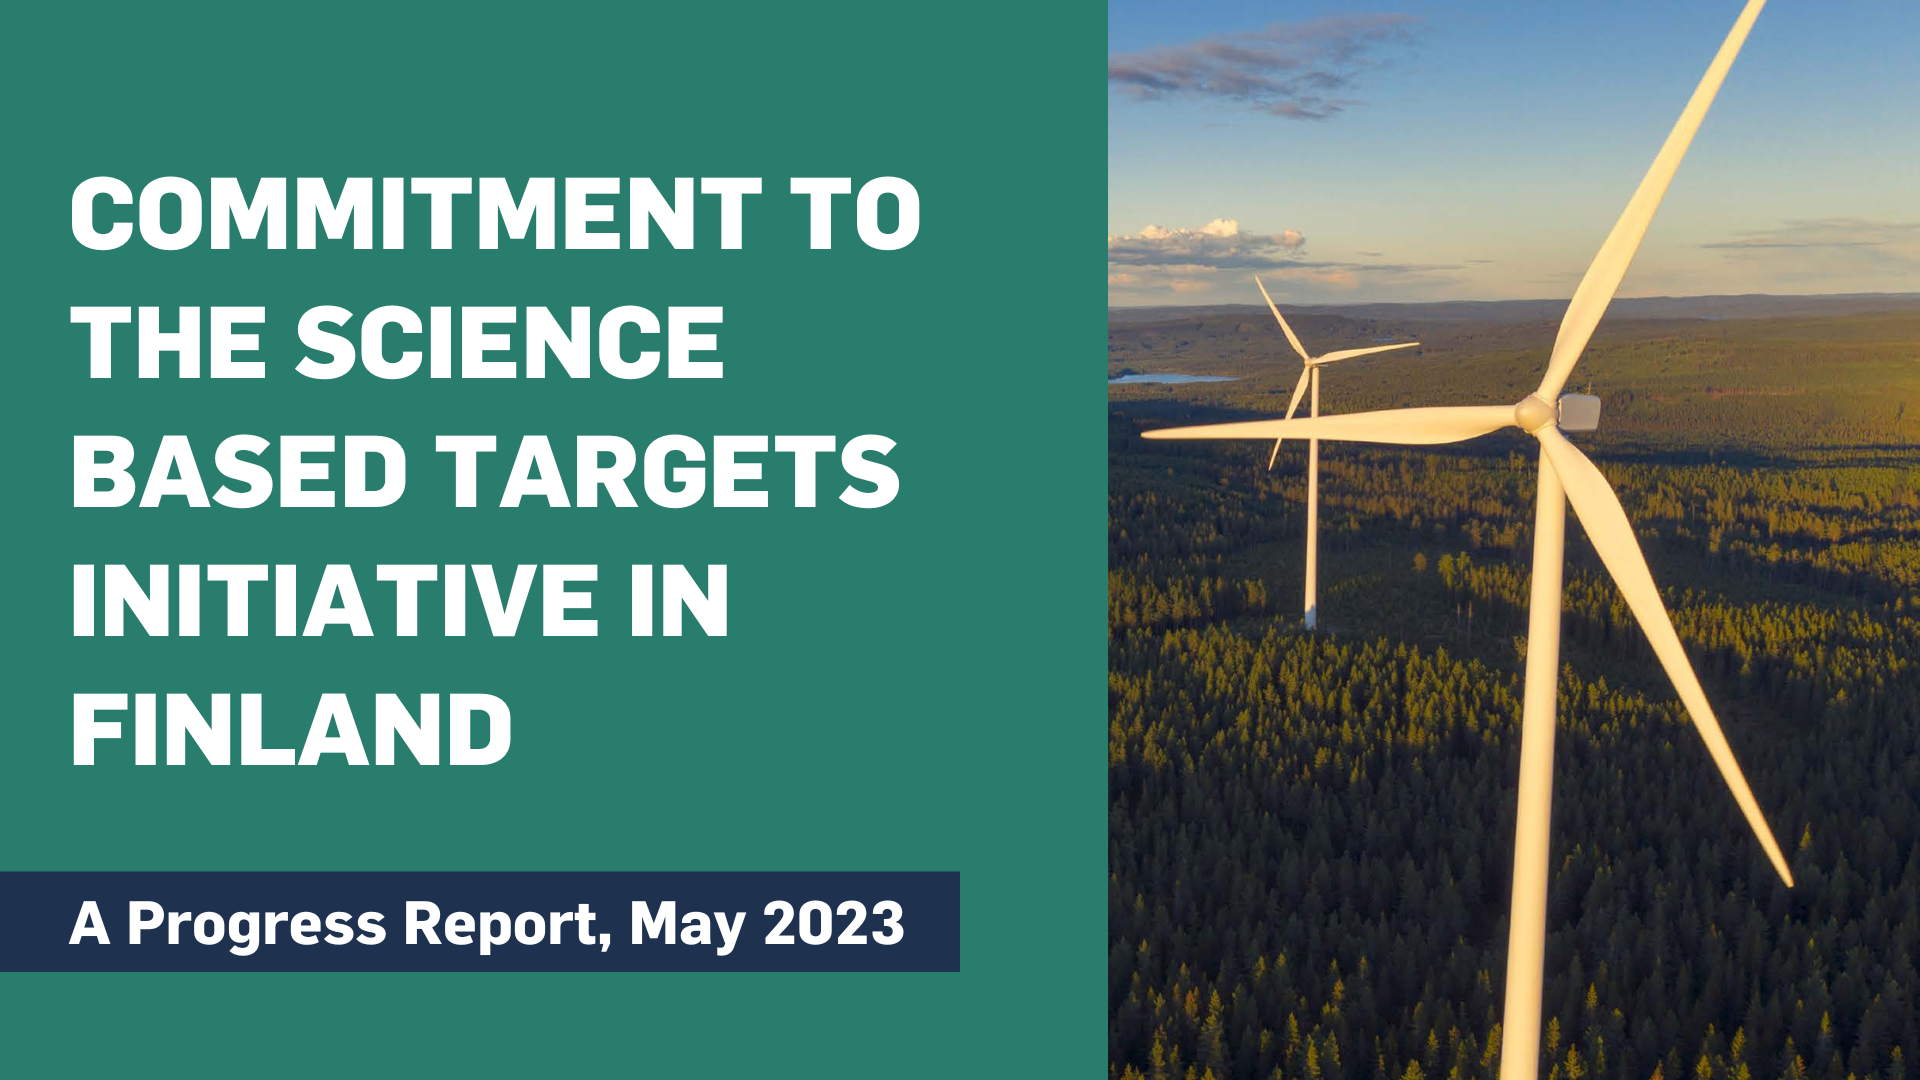 The commitment of Finnish companies to science-based climate targets (SBT) has increased in recent years, but actual emissions reductions have not met global comparison levels. The findings are made in a report published on Wednesday, 31 May by UN Global Compact Finland.